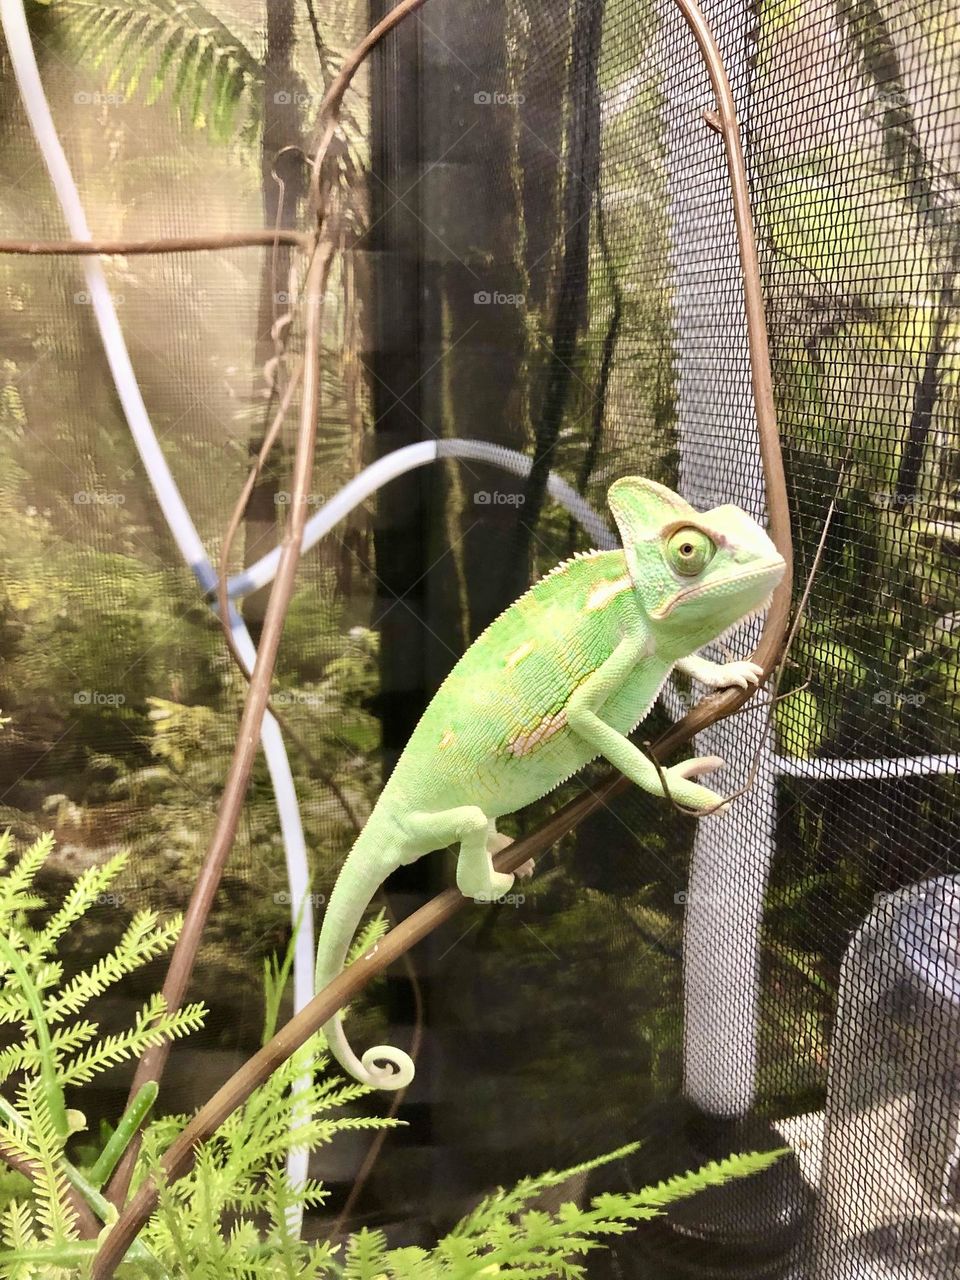 Rainforest creature at the Pet a store - Green chameleon 